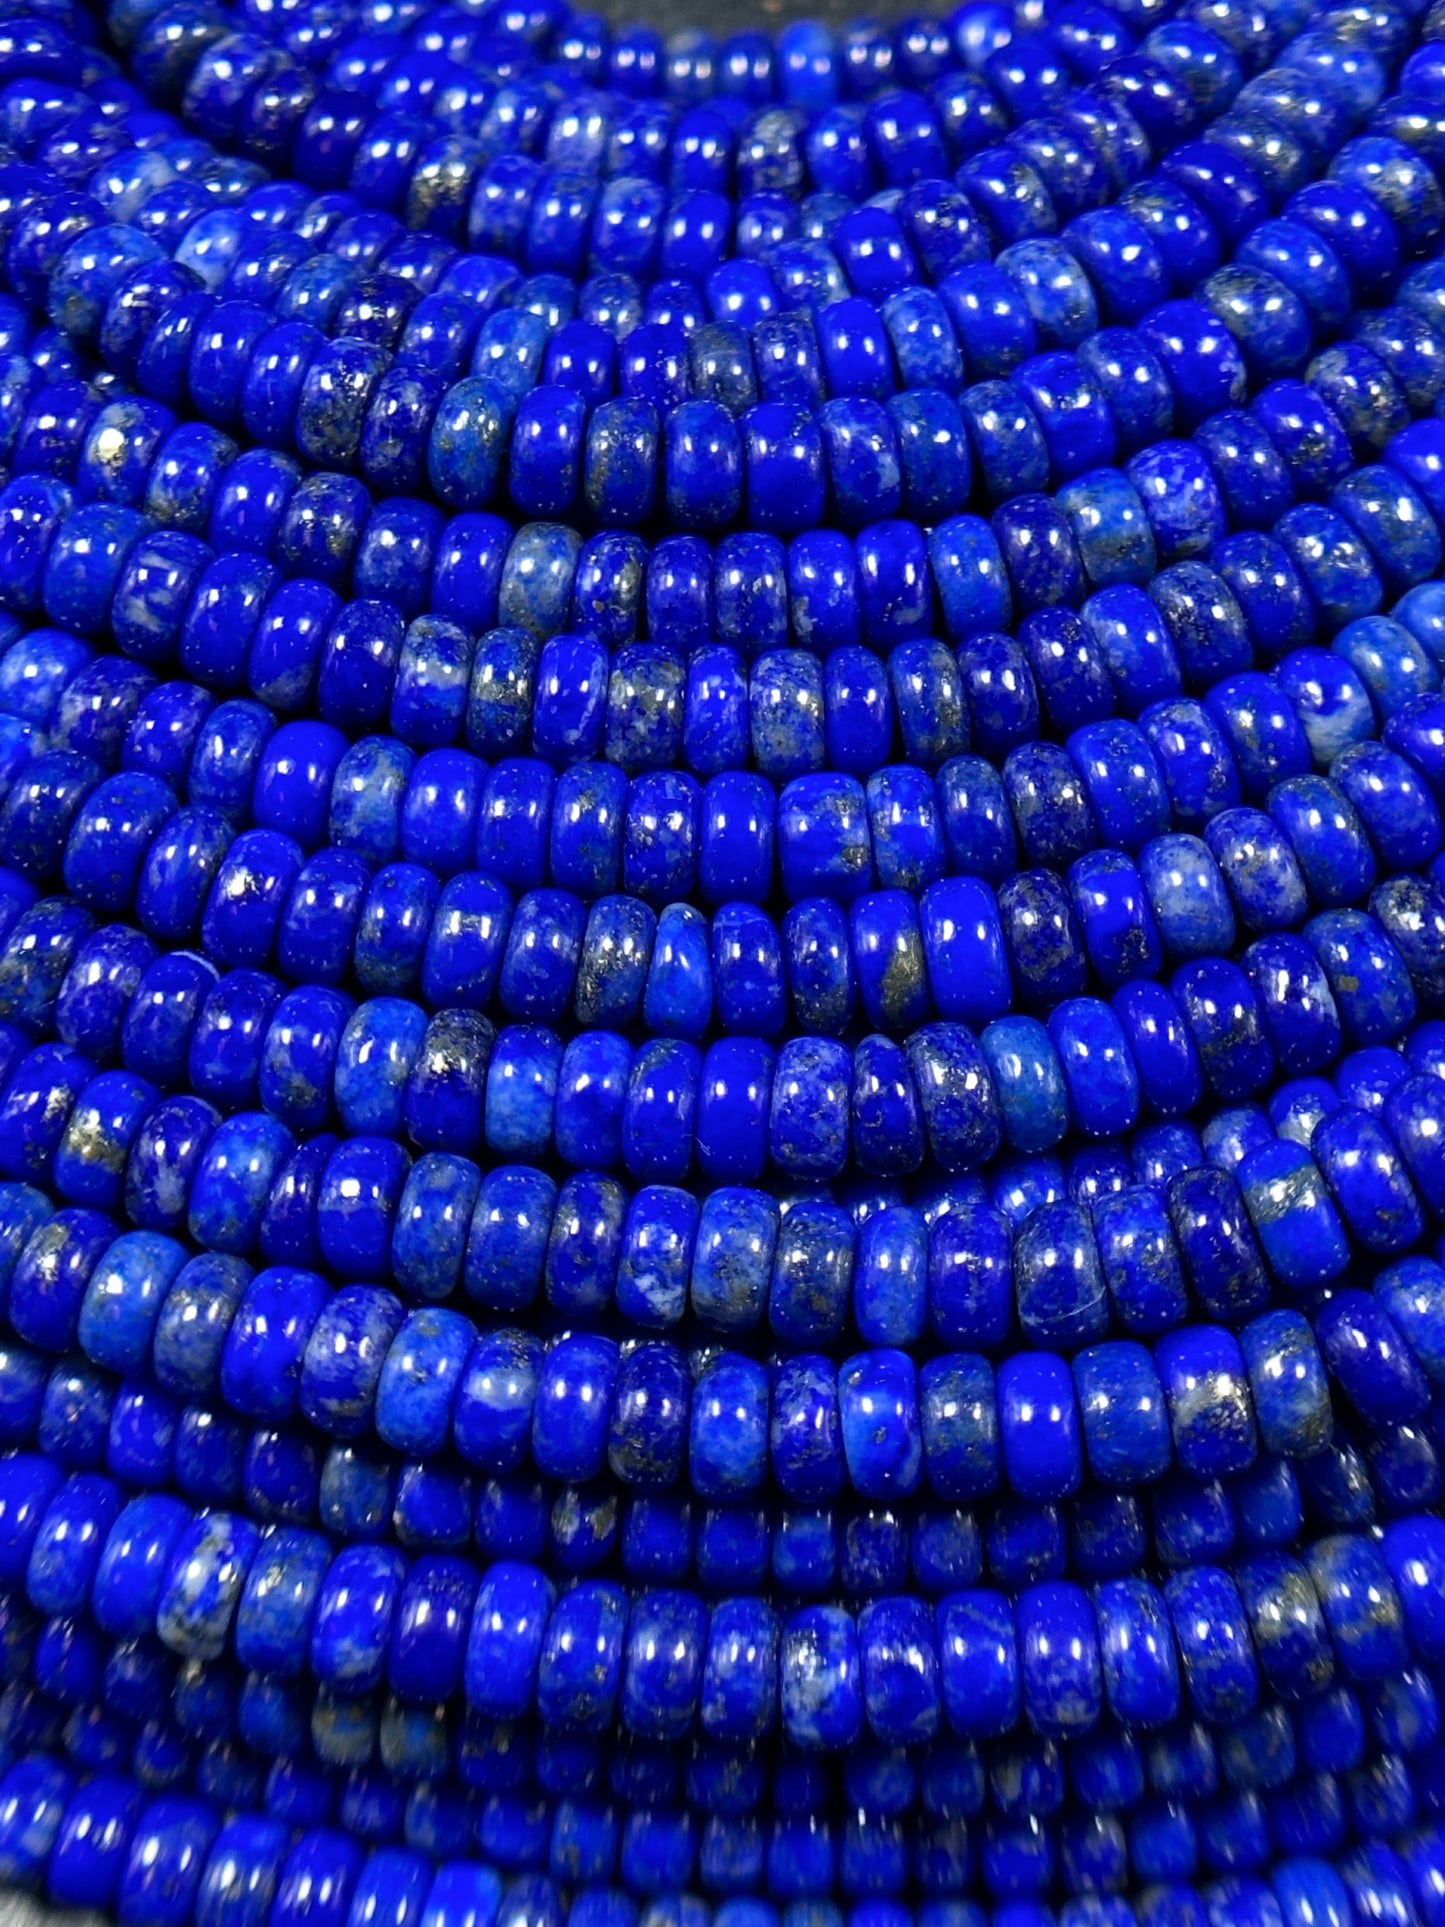 Natural Lapis Lazuli Gemstone Bead Smooth 4x2mm Rondelle Shape Beads, Gorgeous Natural Royal Blue Color Lapis Beads, Excellent Quality 15.5"